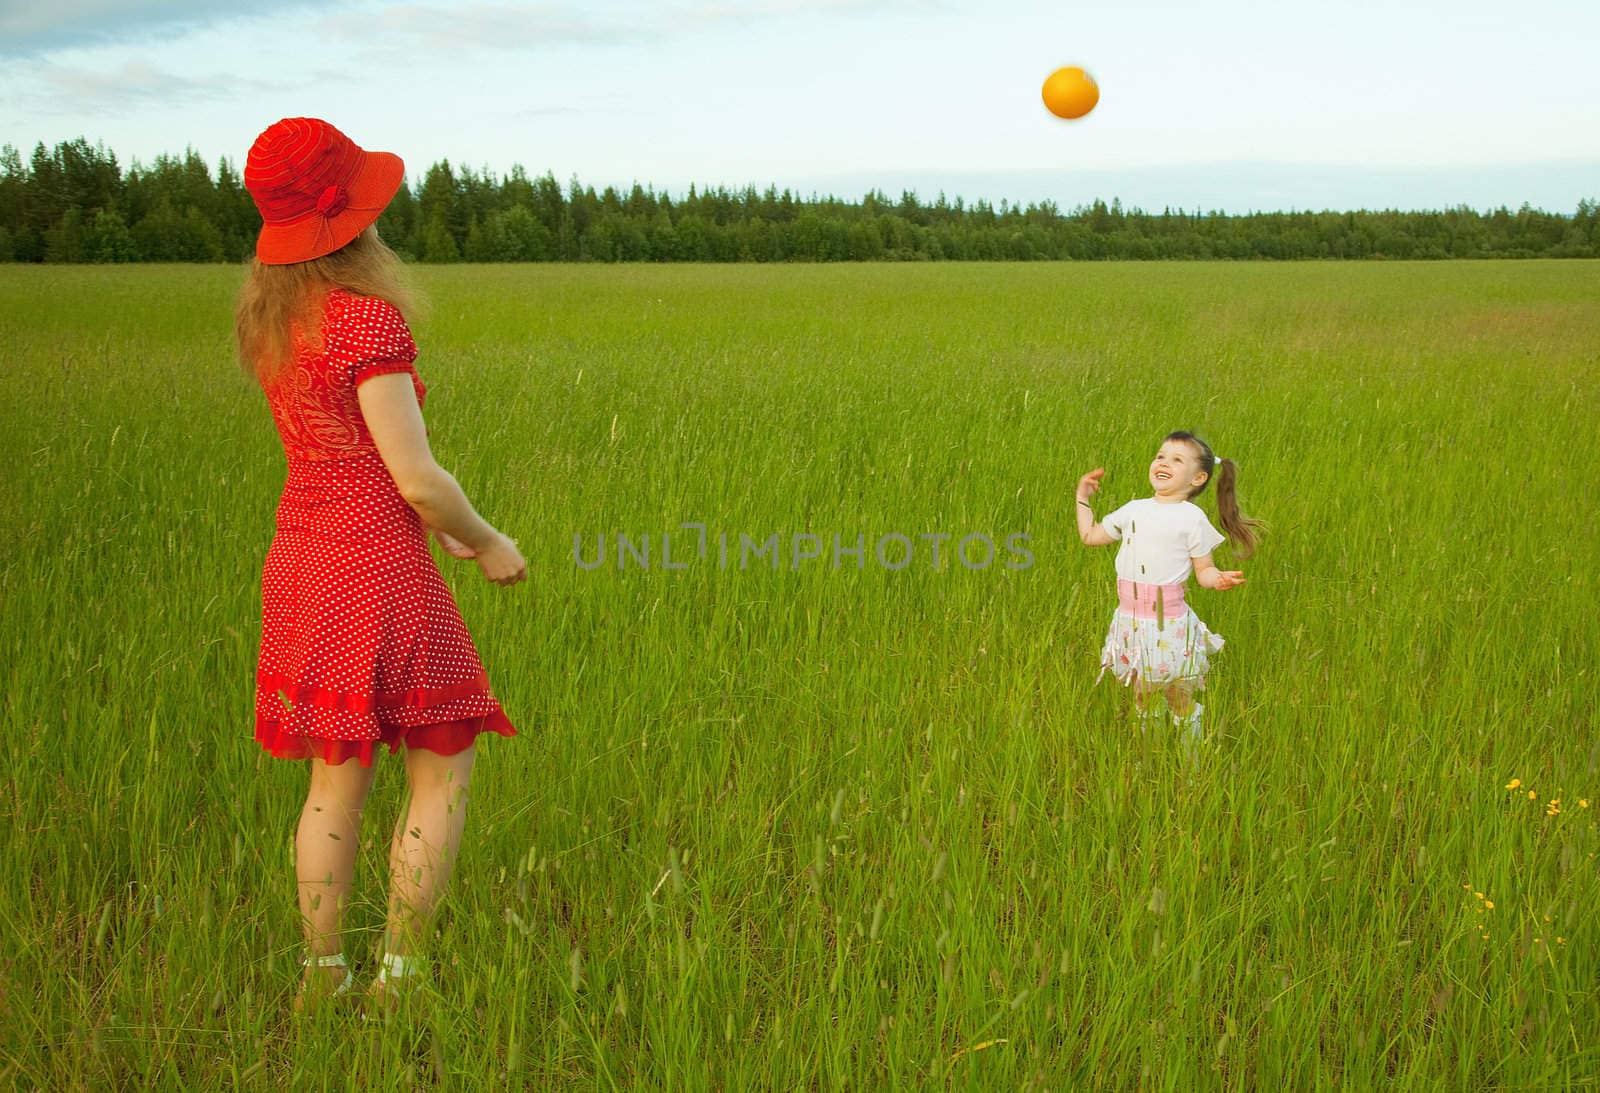 Mum and daughter play with a ball by pzaxe